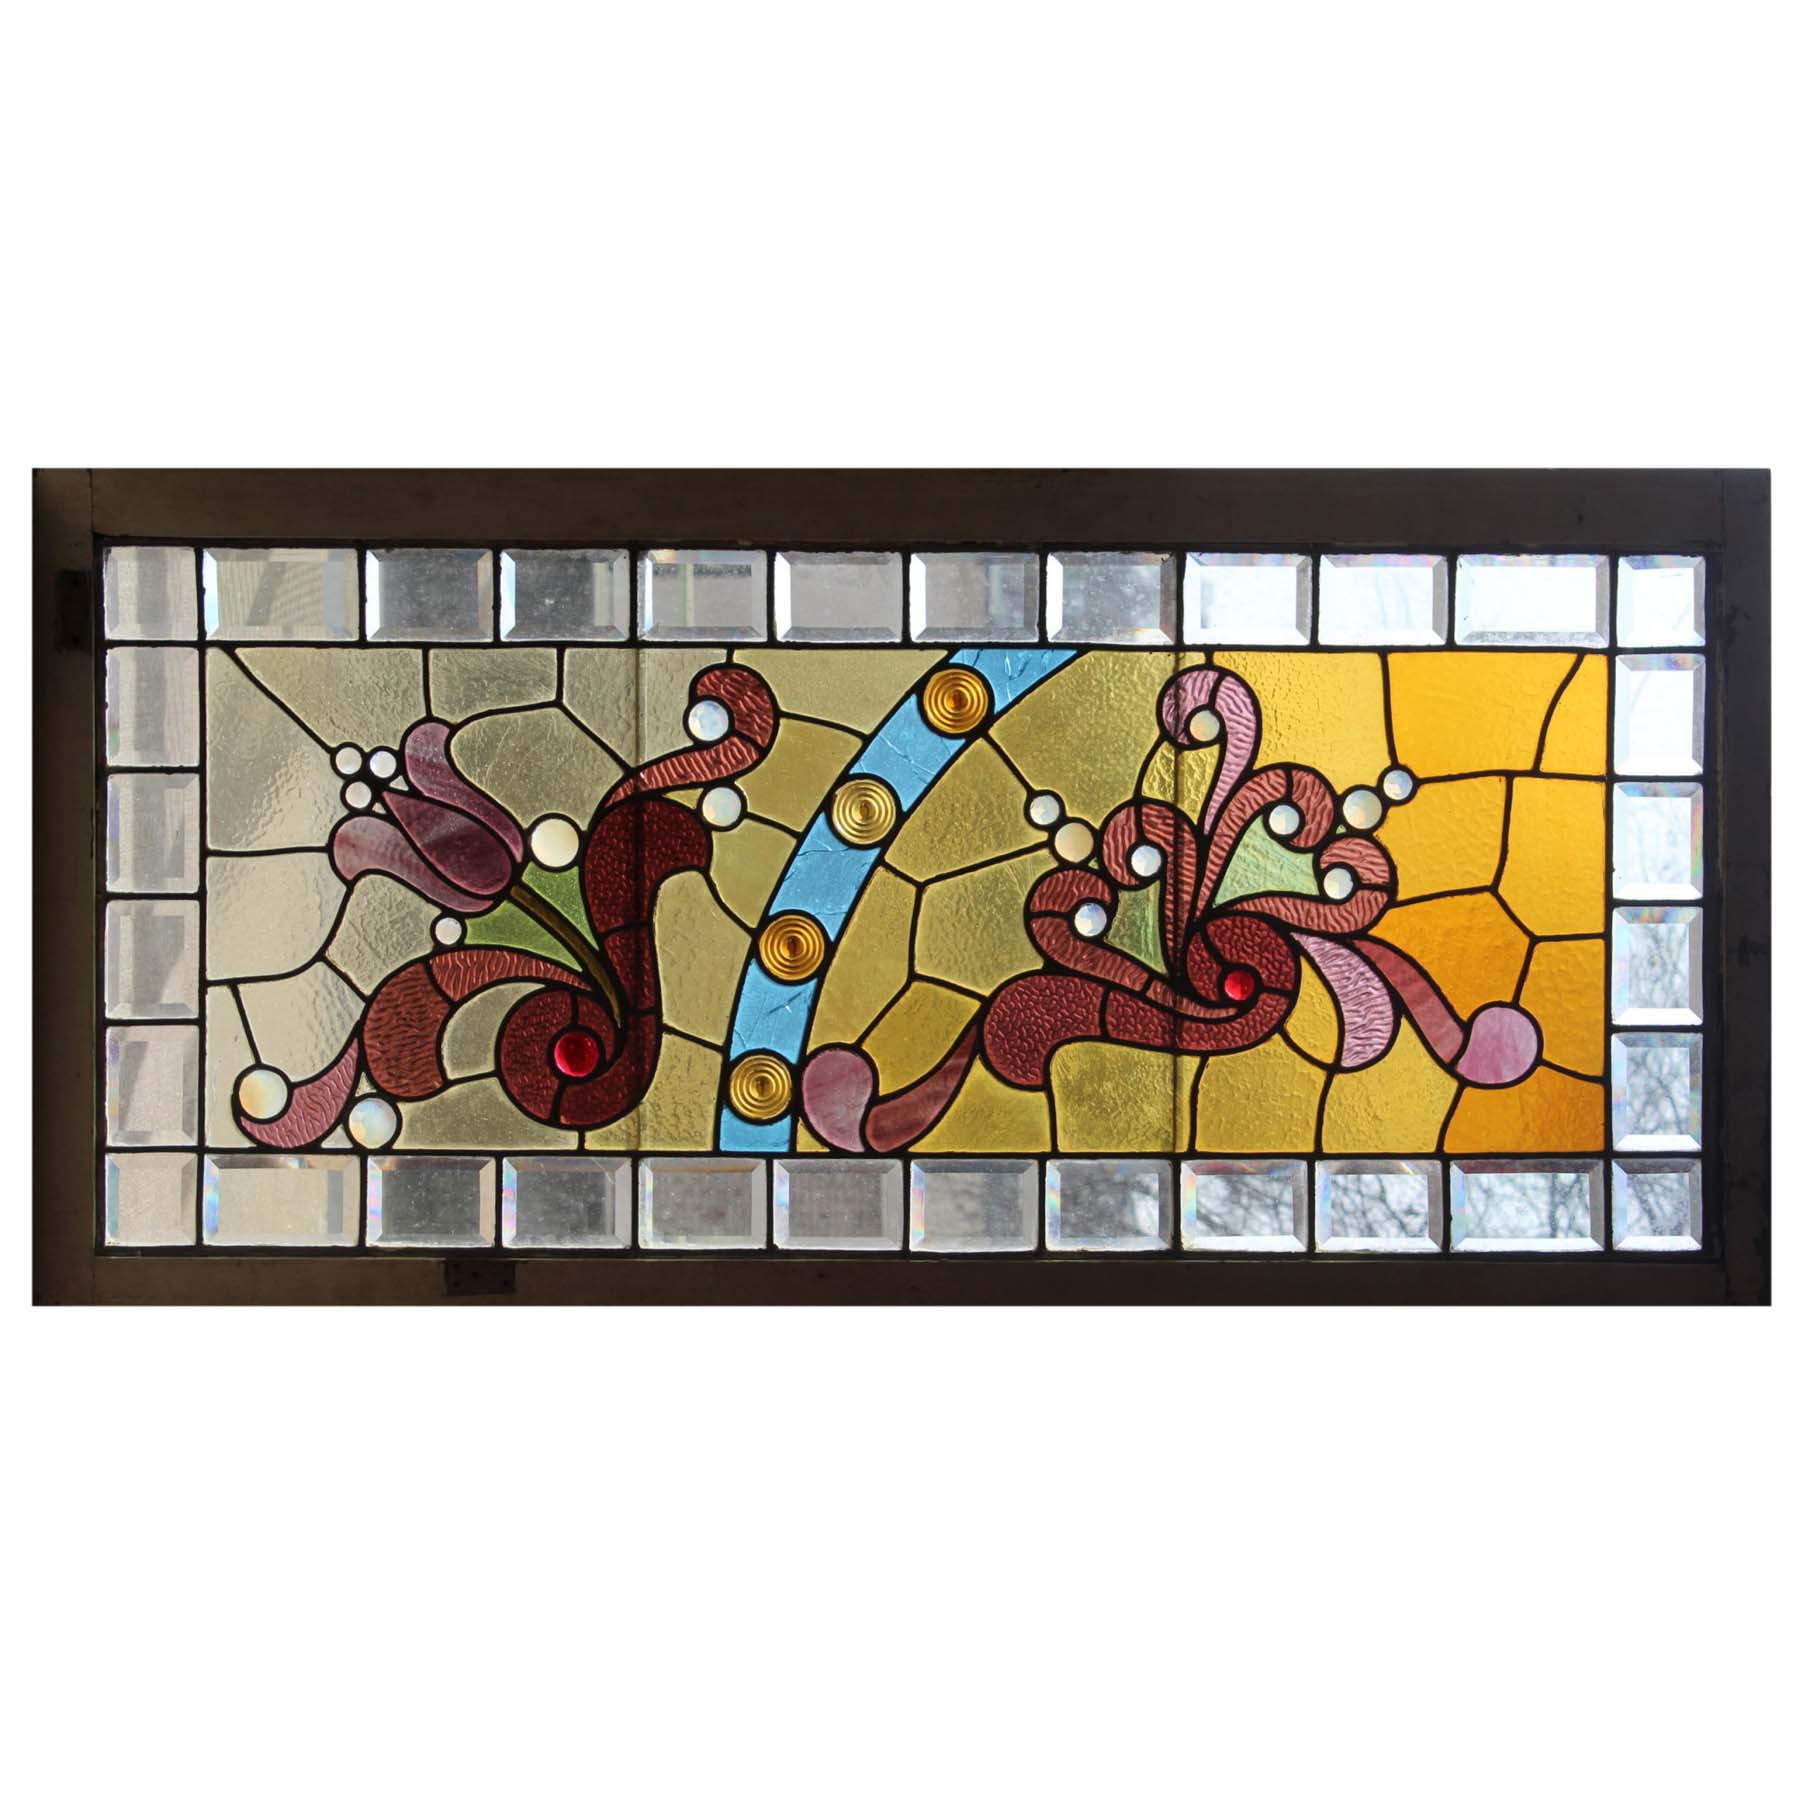 SOLD Rare Antique American Stained Glass Window, Early 1900s-67292